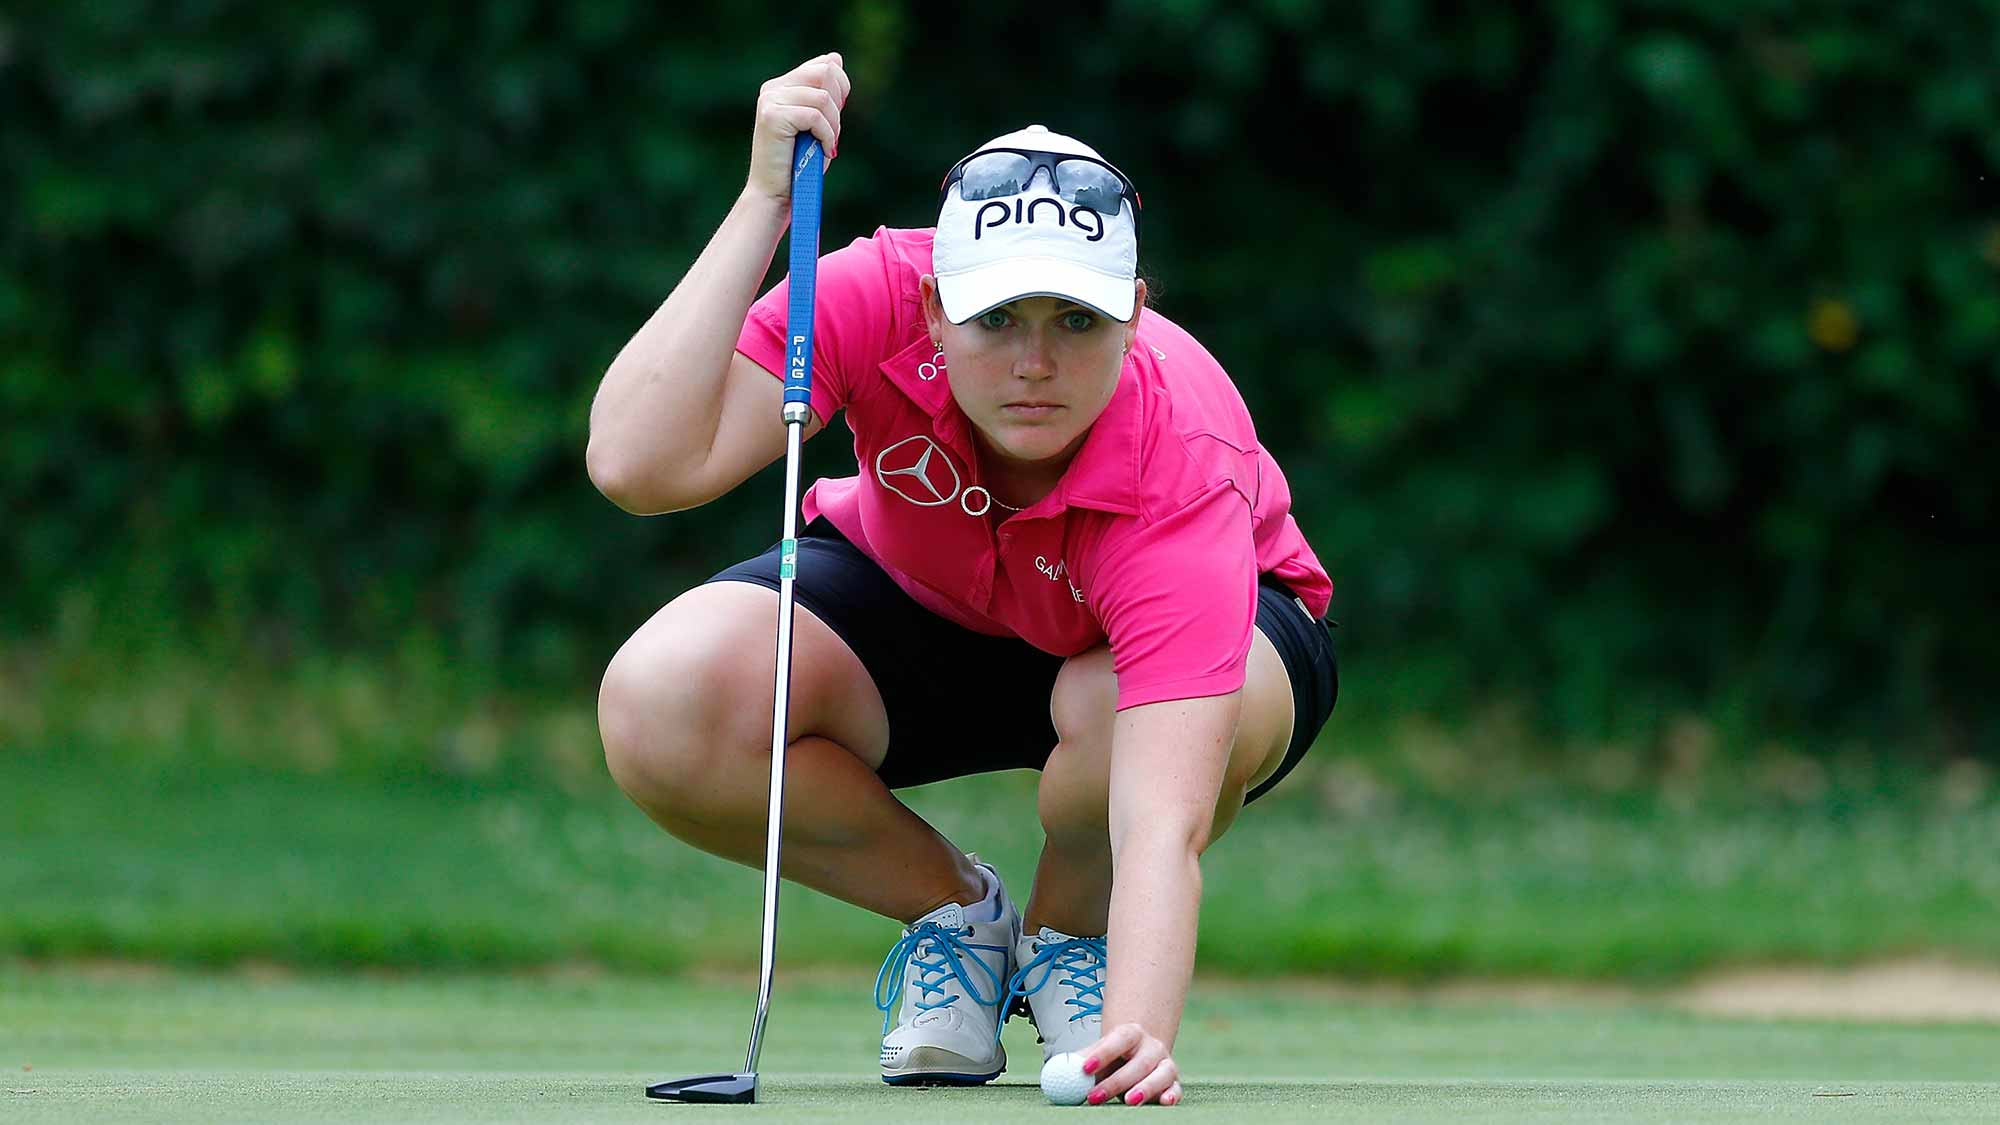 Caroline Mason of Germany lines up a putt on the 9th hole during the second round of the LPGA Cambia Portland Classic at Columbia Edgewater Country Club